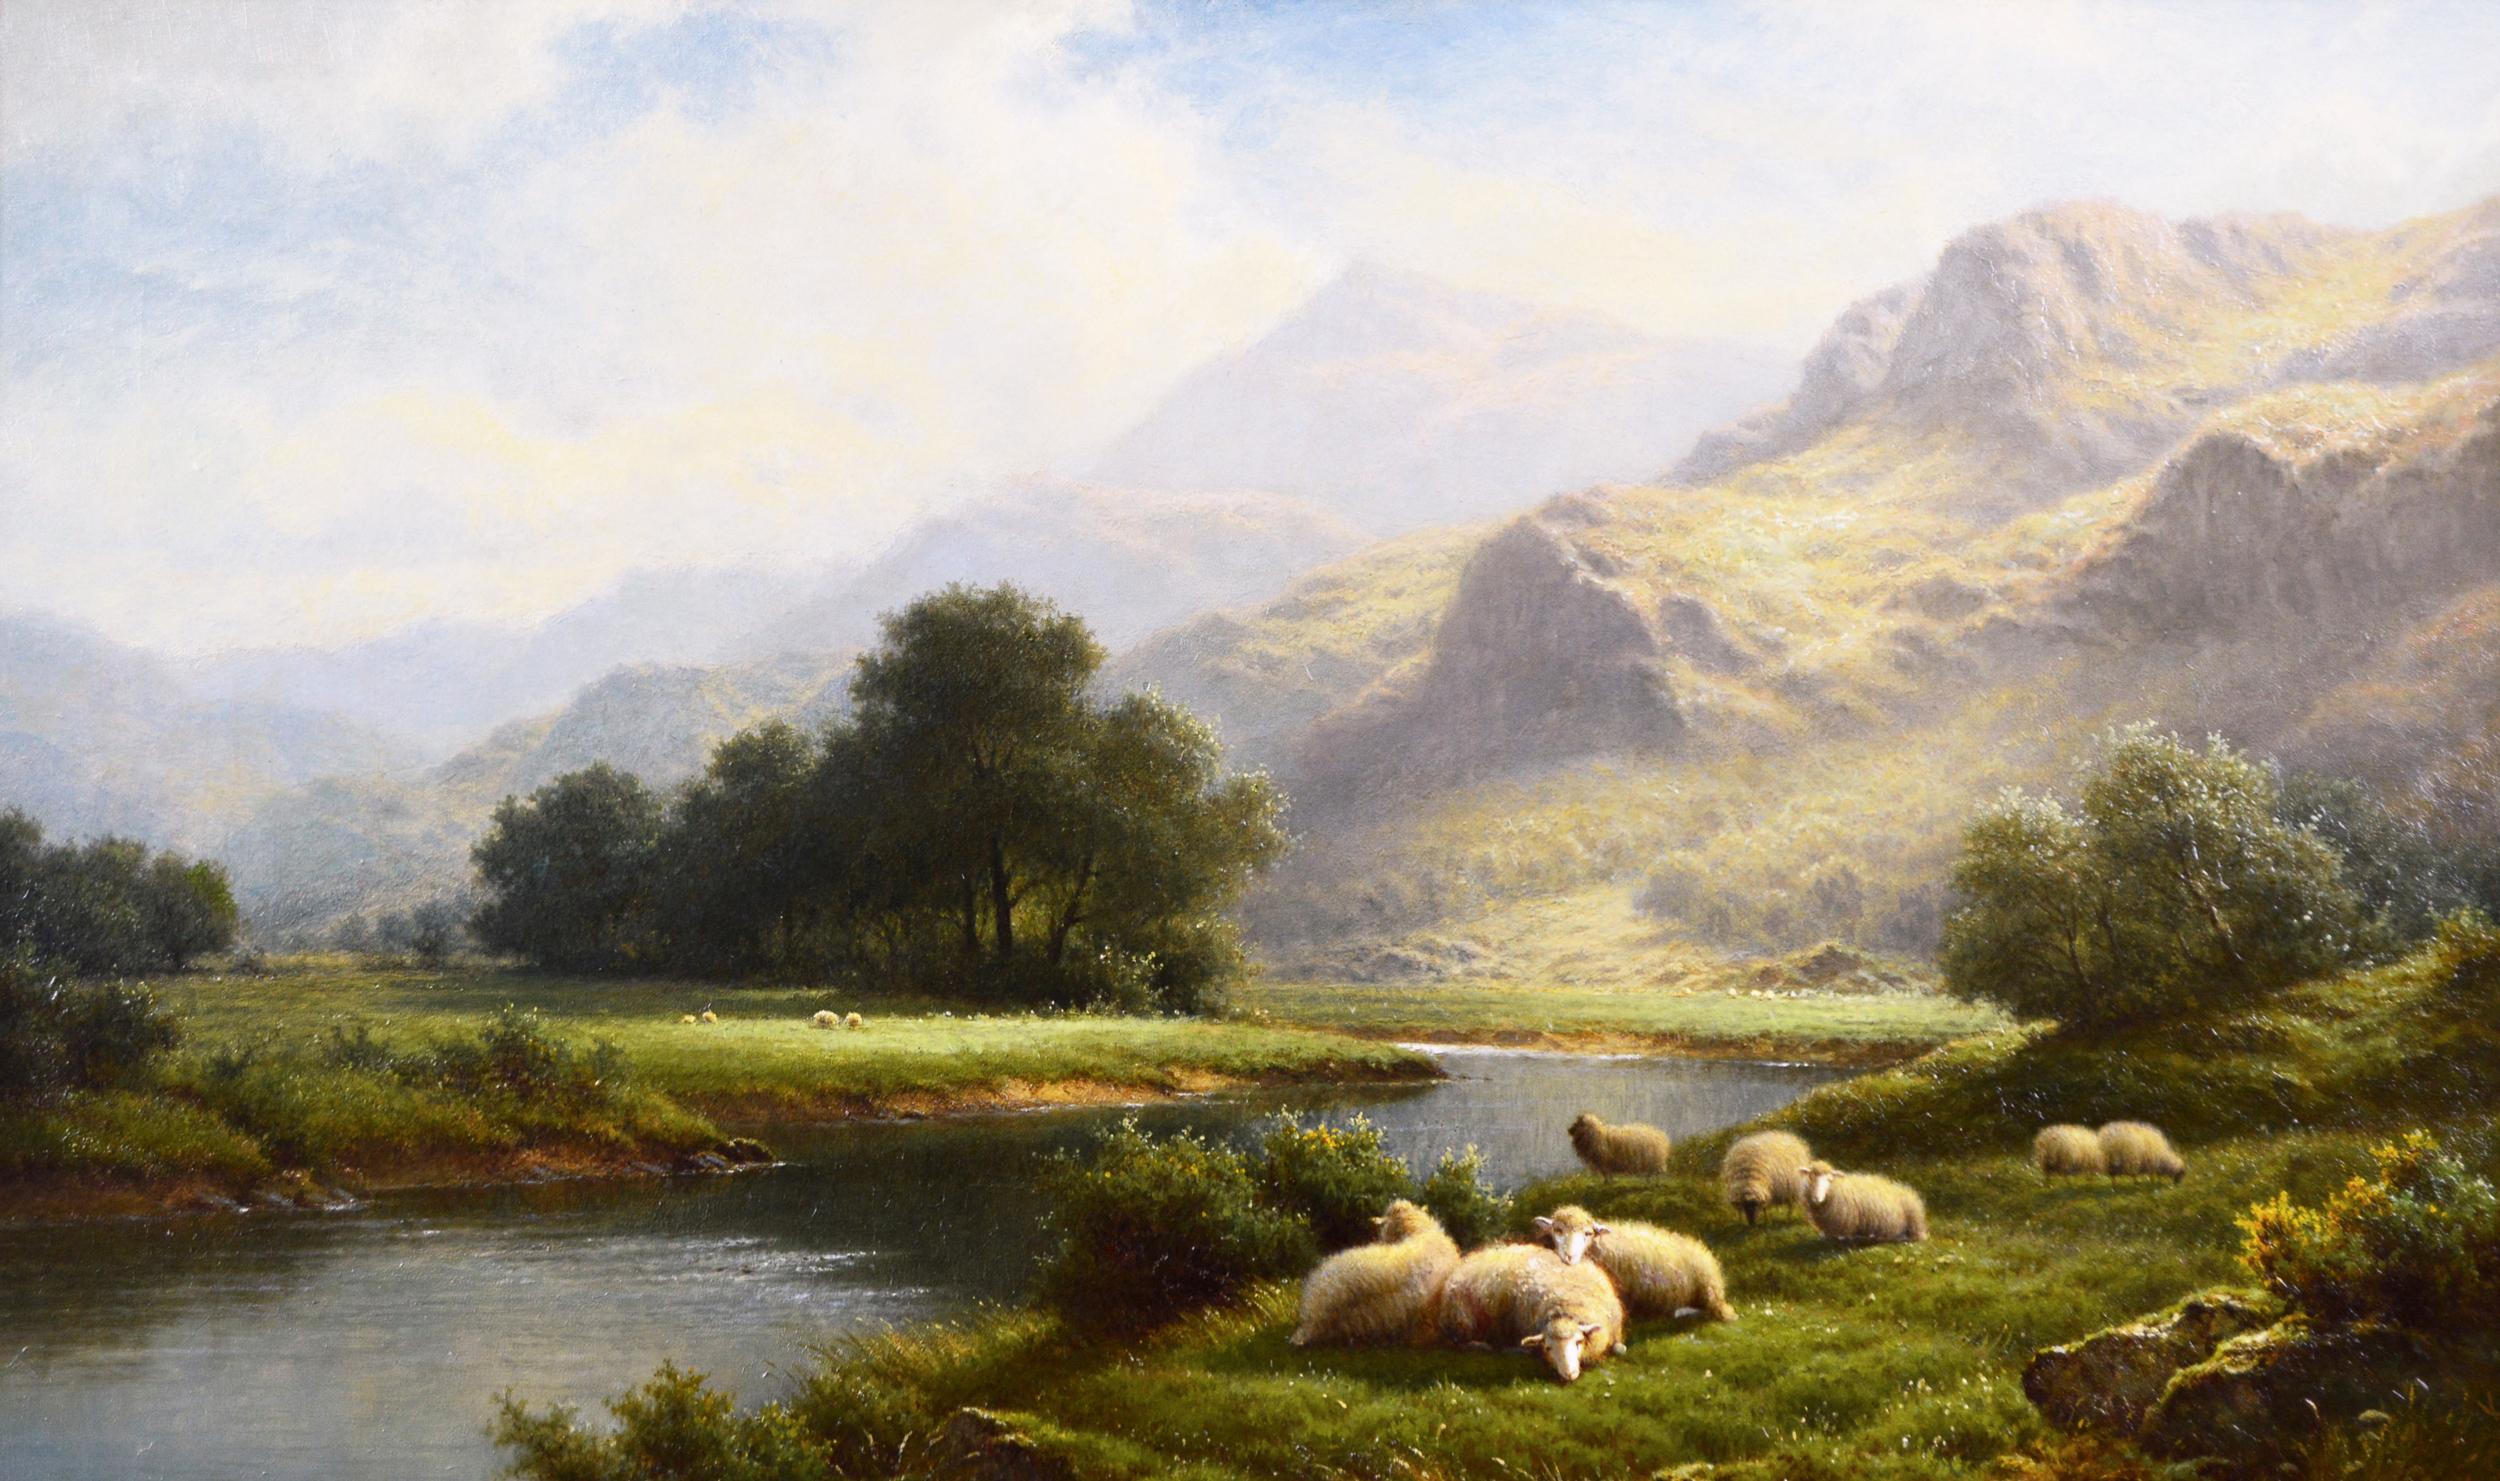 Welsh landscape oil painting of sheep near a river  - Painting by Walter J Watson